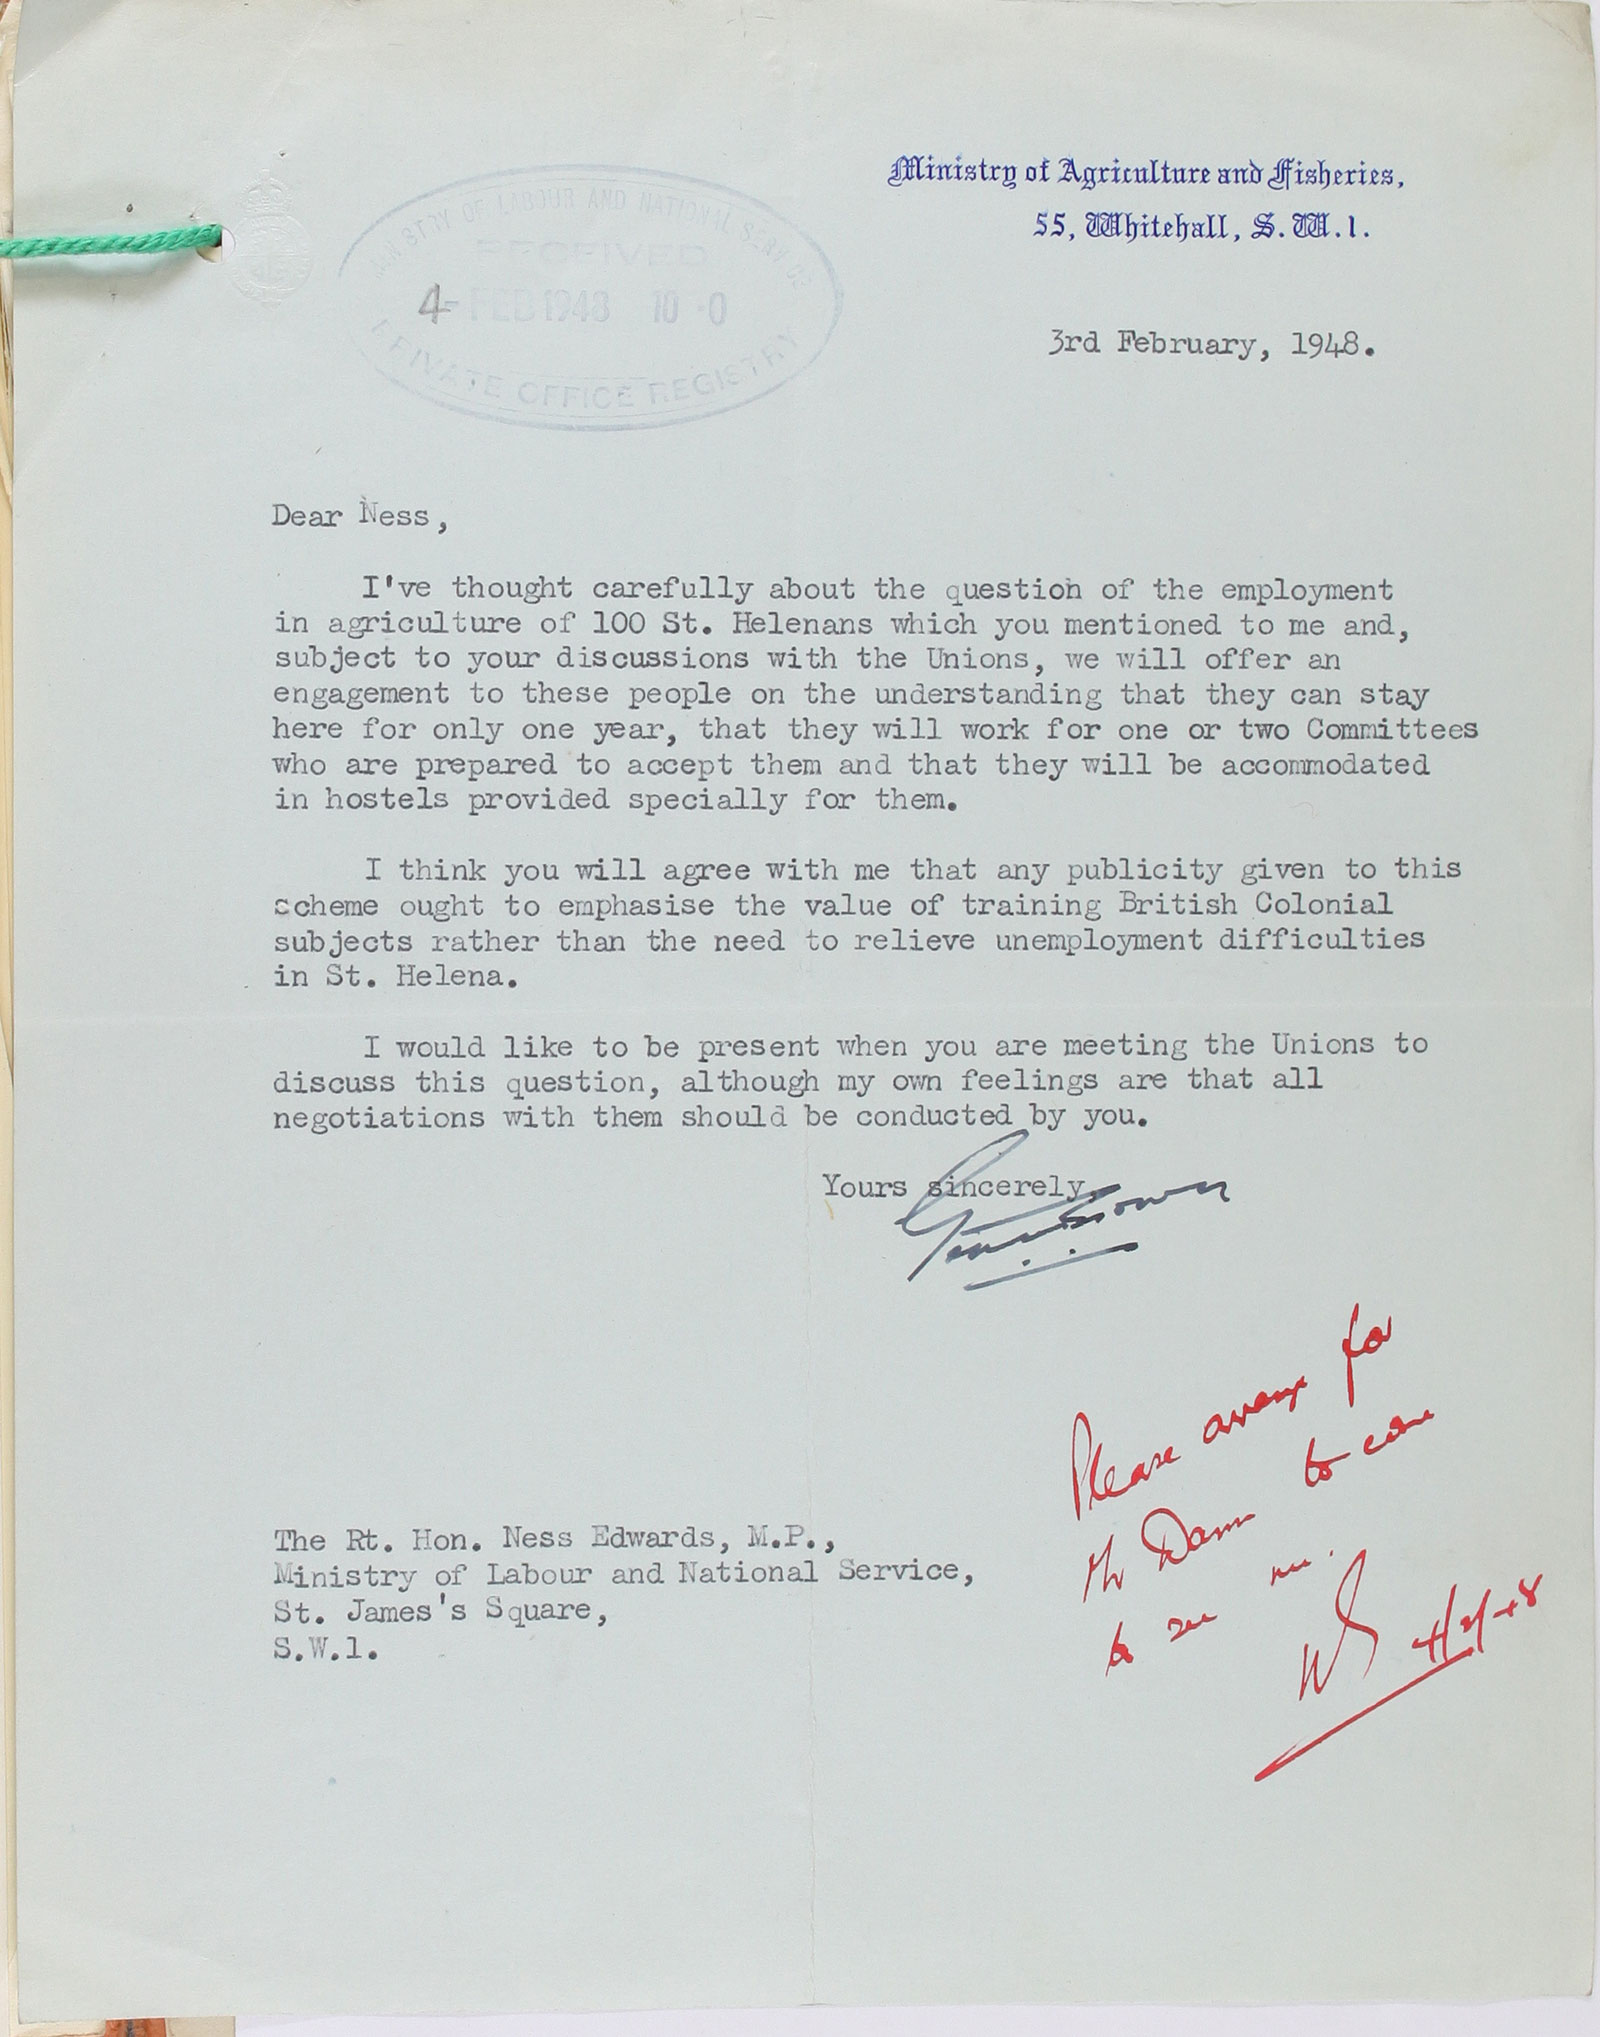 Letter from the Ministry of Agriculture and Fisheries to an M.P. about an agricultural employment scheme, 3rd February, 1948 (LAB 43/12)